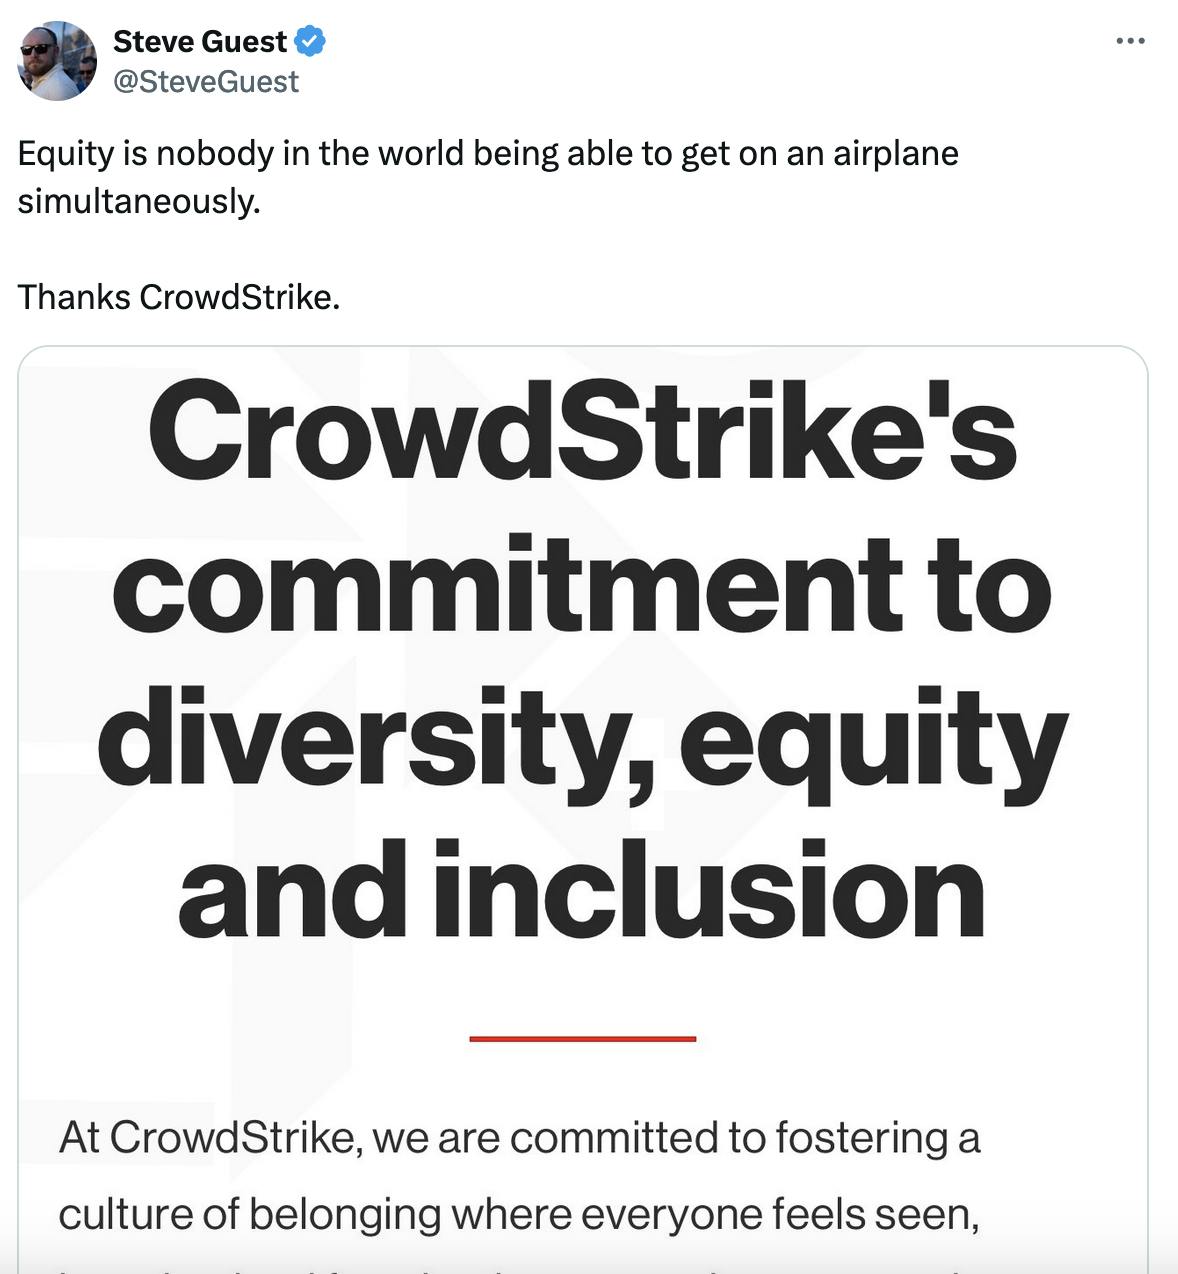 Twitter screenshot Steve Guest @SteveGuest: Equity is nobody in the world being able to get on an airplane simultaneously. Thanks CrowdStrike. With a photo screenshot of a CrowdStrike statement on DEI